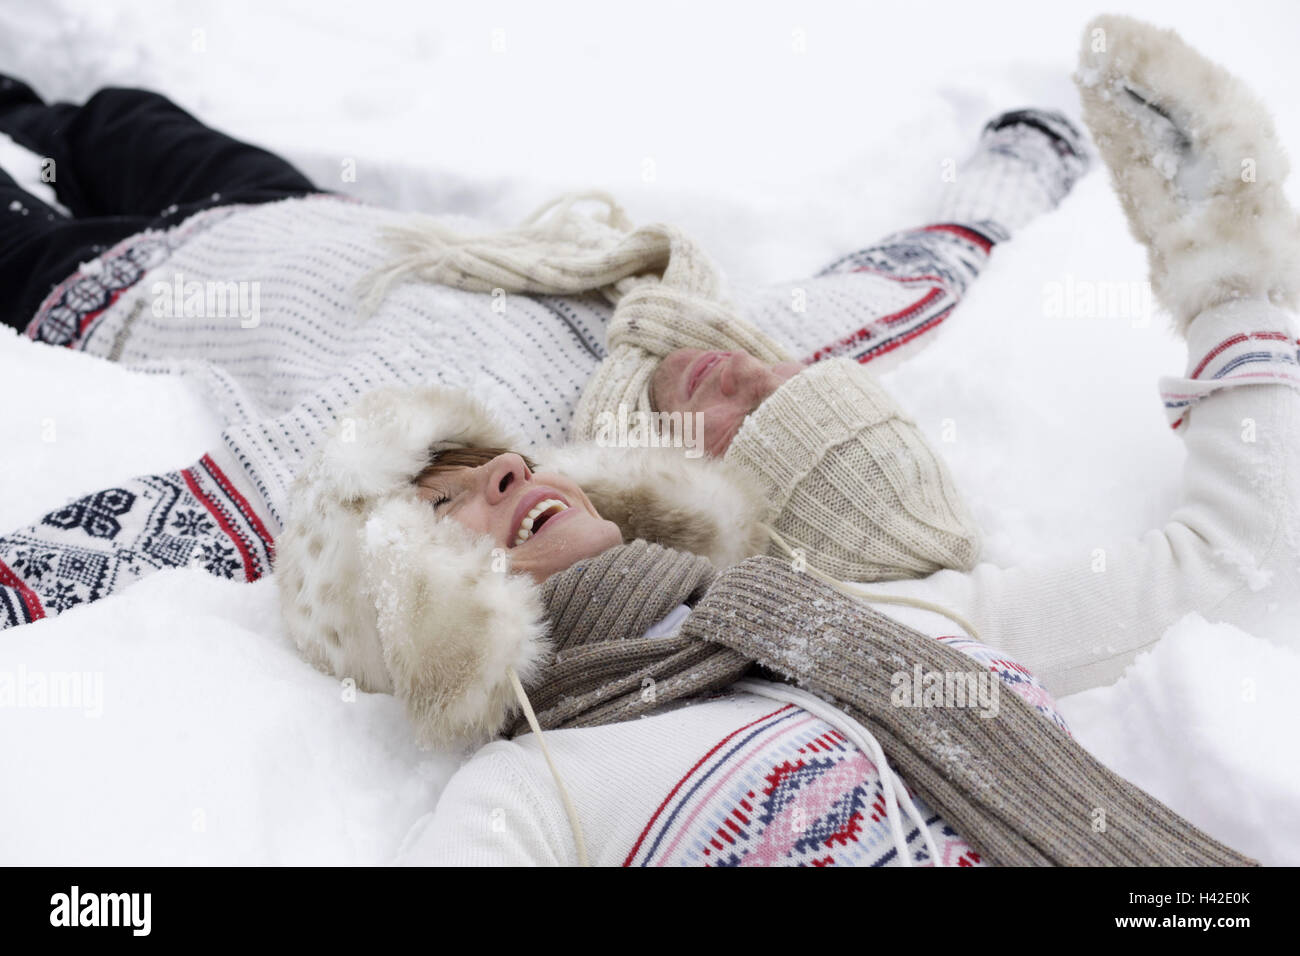 Pair, young, snow, lies, laughs   Series, 20-30 years, head at head, partnership, relationship, love, happily, leisure time, outside, in the winter passport snow fun winters, clothing, wintry, winter clothing, caps, scarfs, gloves, relaxation, recuperation, fun, enjoys Stock Photo